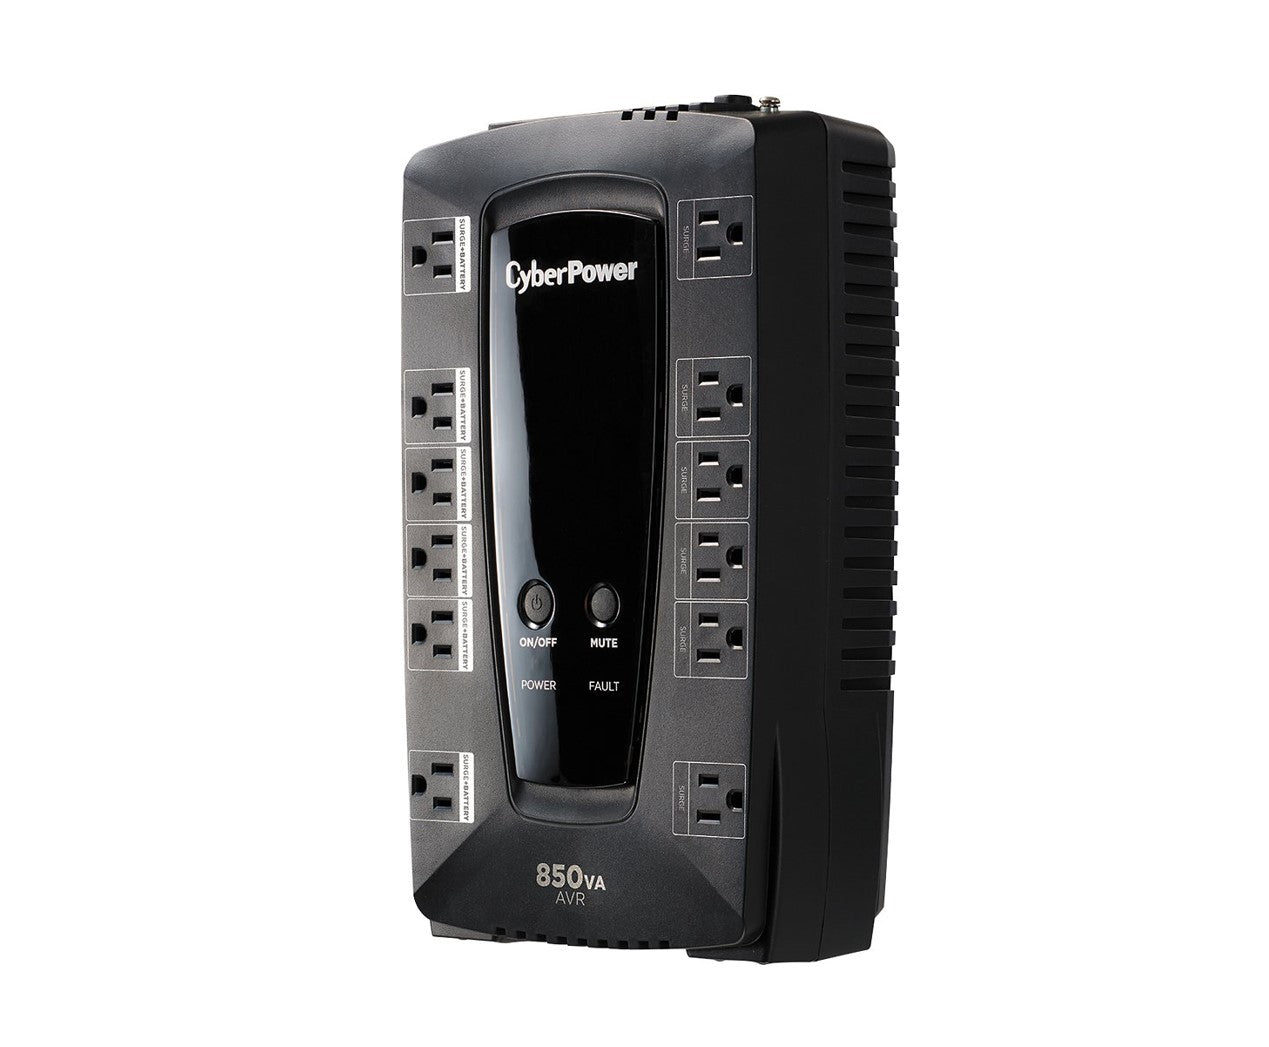 CyberPower LE850G-R New Battery Backup 850VA/460W with Surge Protection UPS - New Battery Certified Refurbished